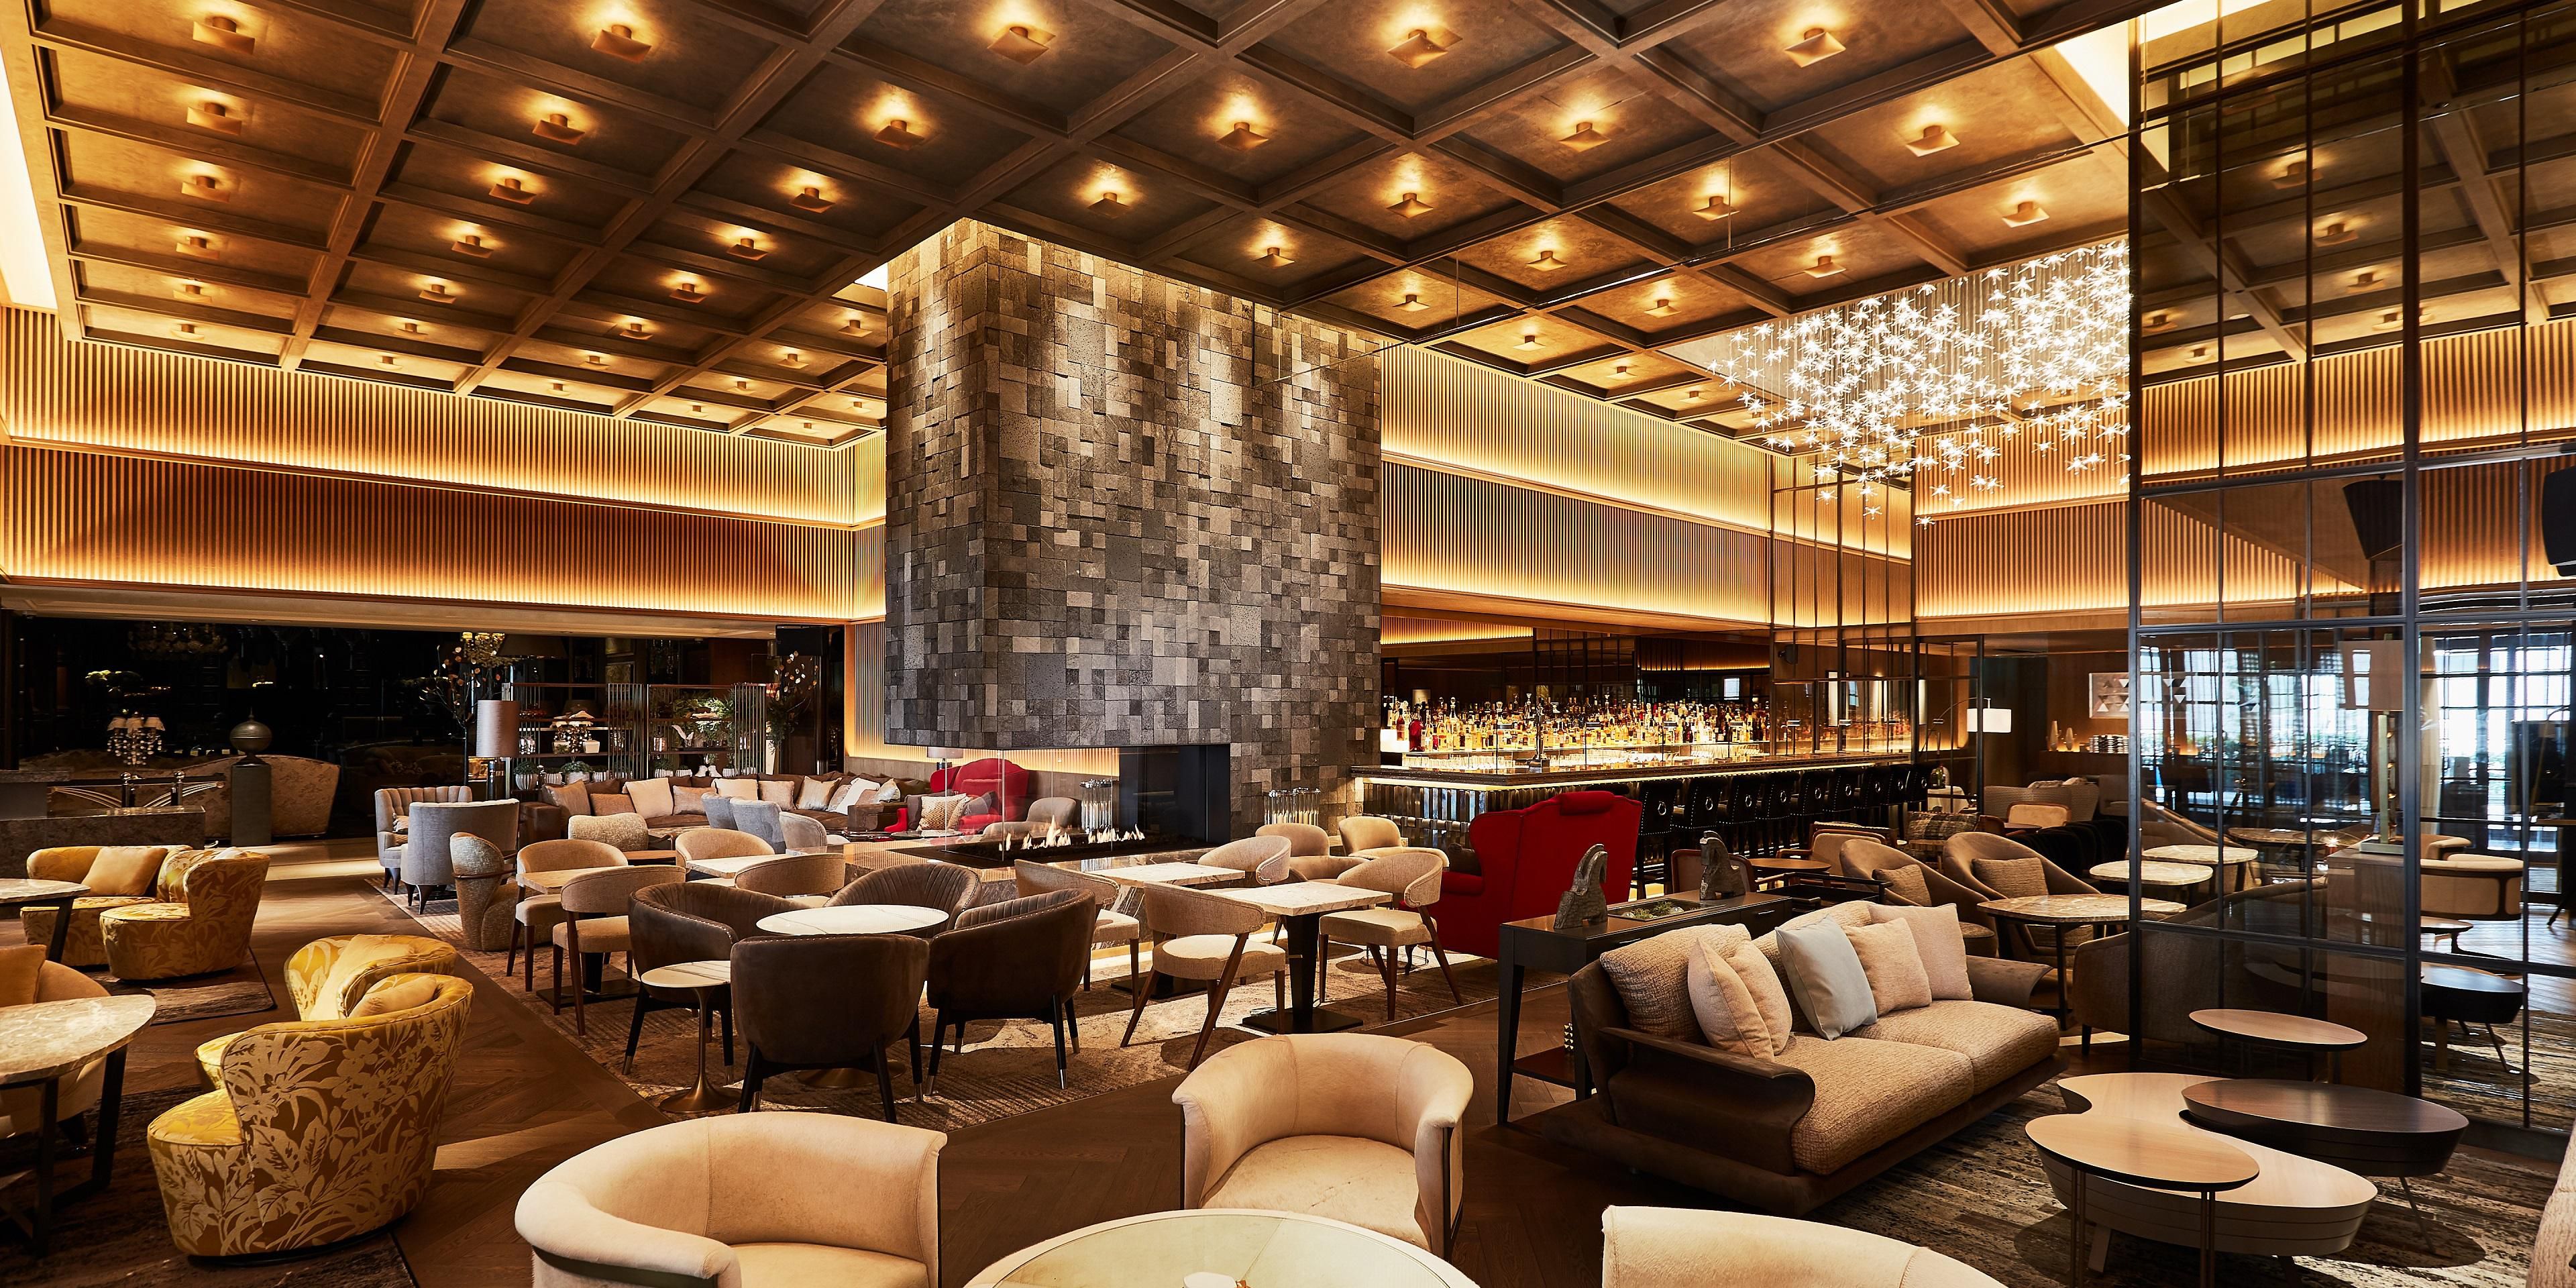 Experience Hudson Lounge, a luxurious expansive lounge and bar newly opened in the main lobby. Surrounded by the warmth of a built-in fireplace, you'll enjoy a full bar counter, a library corner, and two separate private rooms that can also be used for dinners, meetings, and parties.